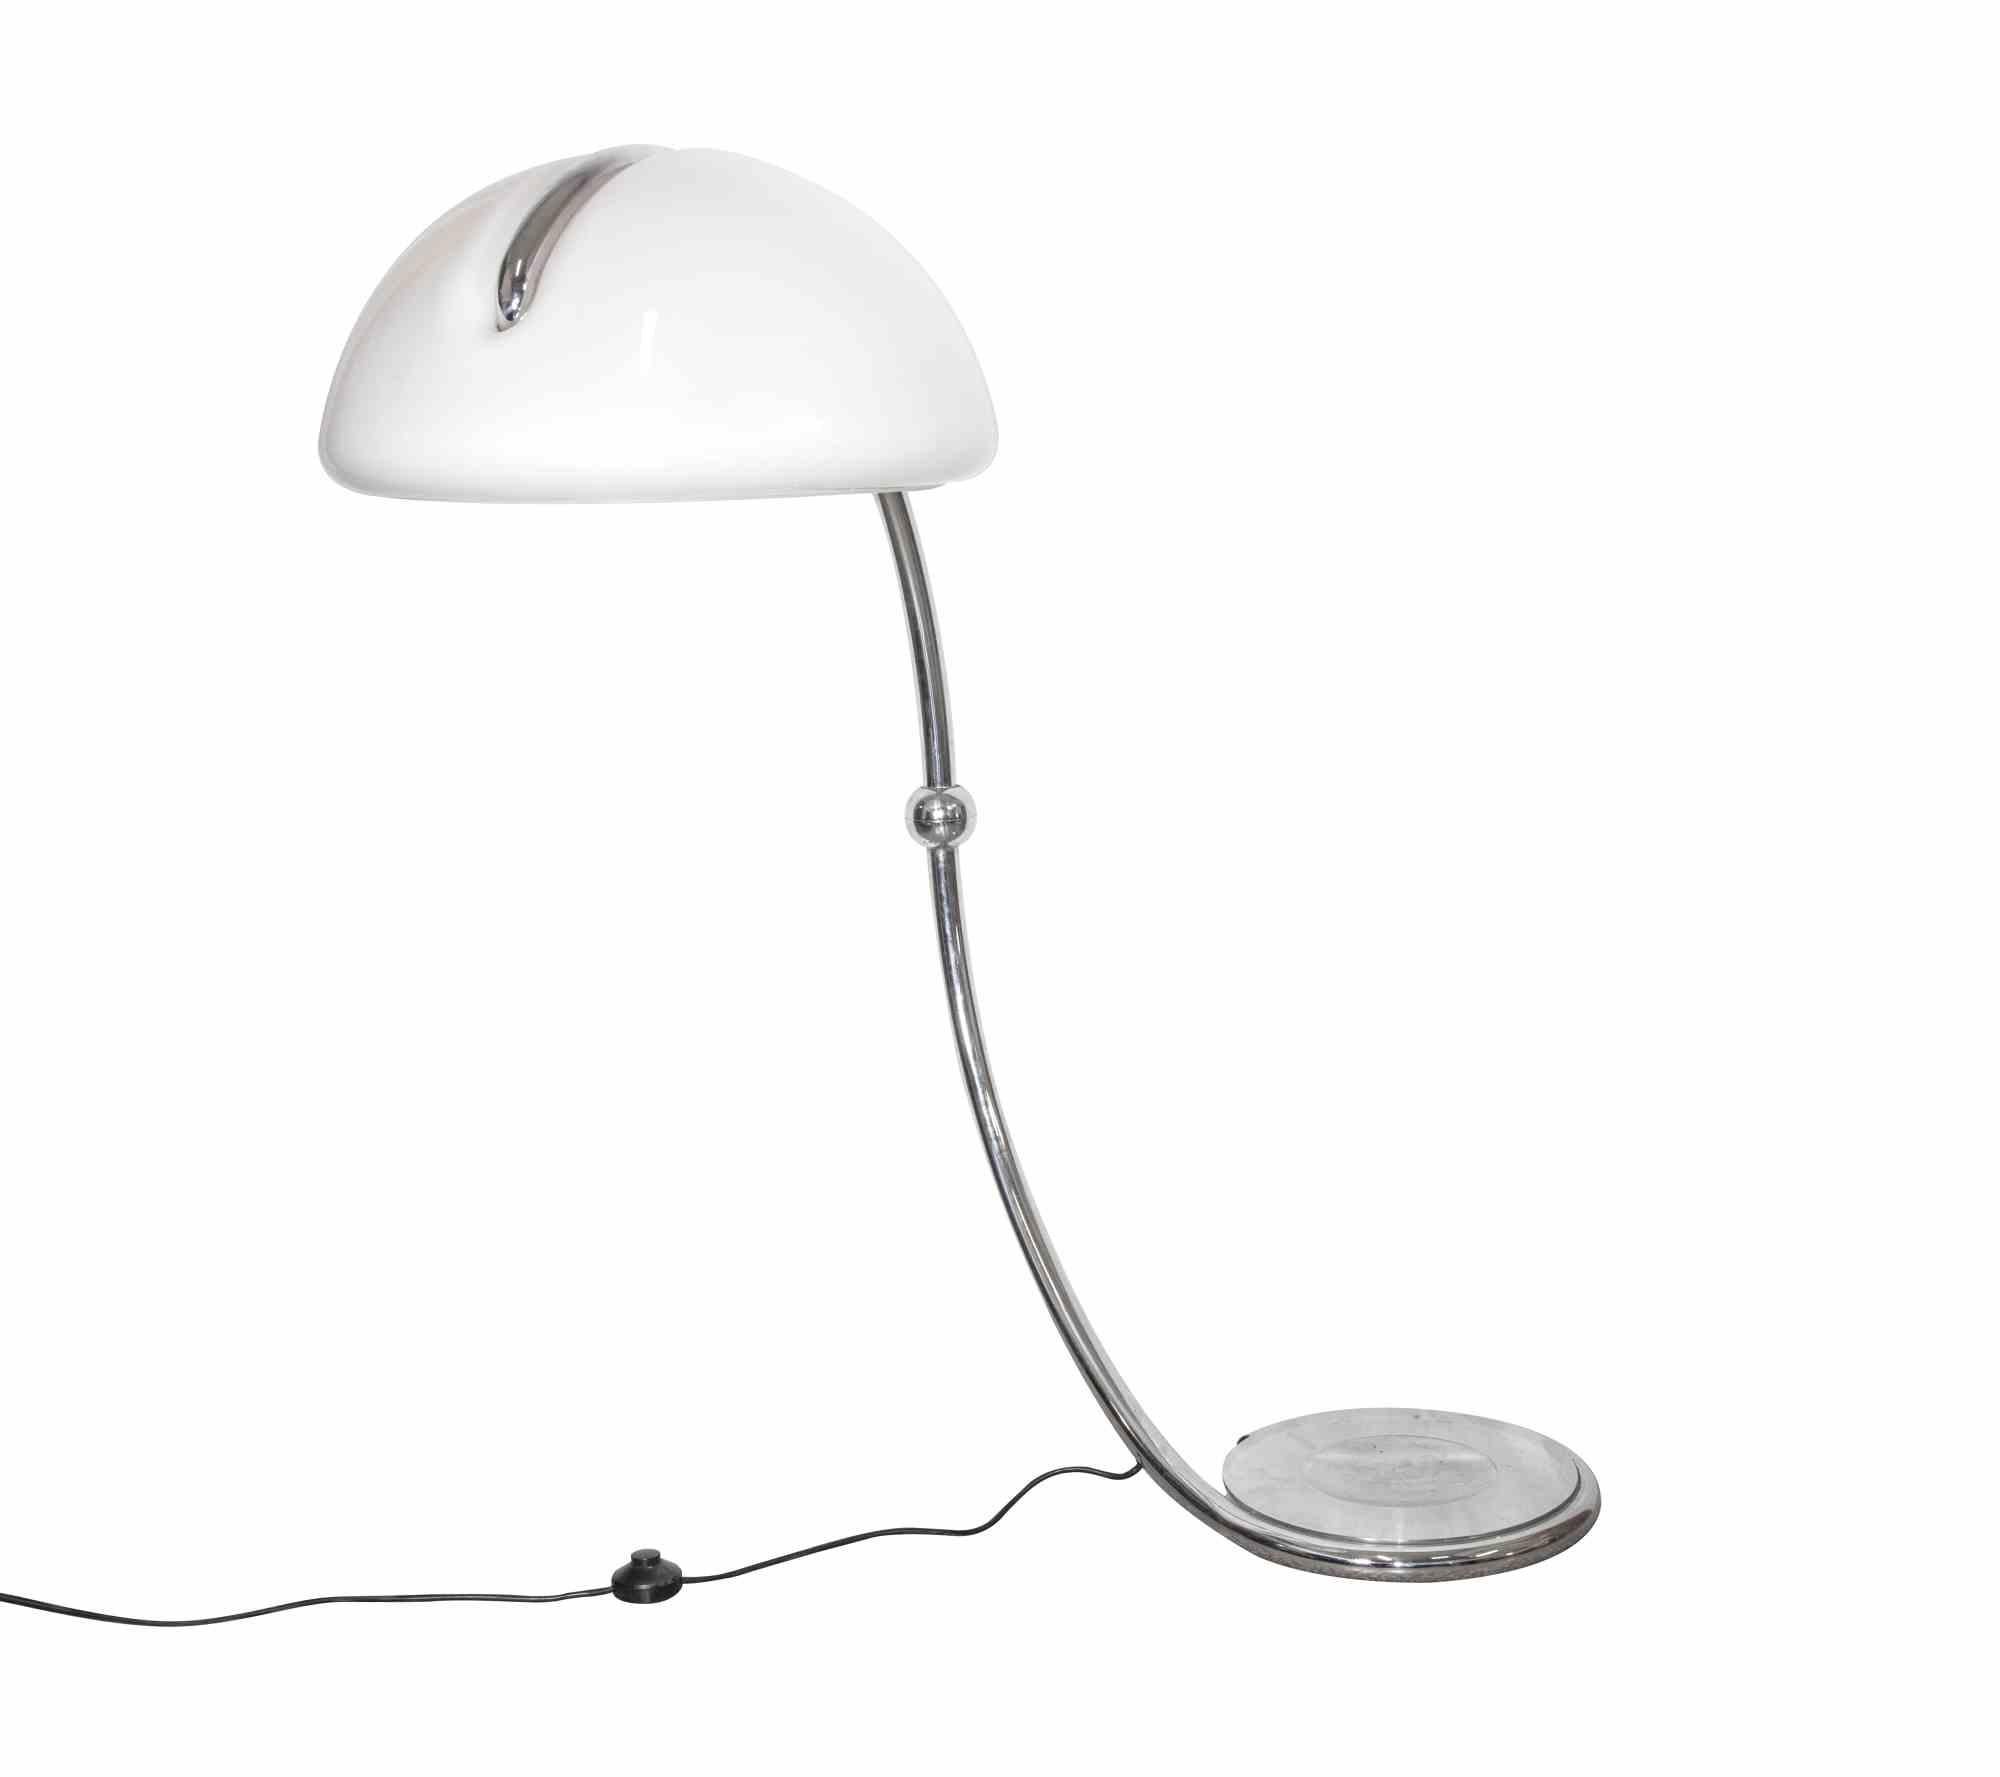 Serpente table lamp is an original design lamp made in Italy.

Cult object of design, this lamp was created by Elio Martinelli in the 1970s.

This glass table lamp or office lamp with broadcasts light is orientable thanks to his articulated